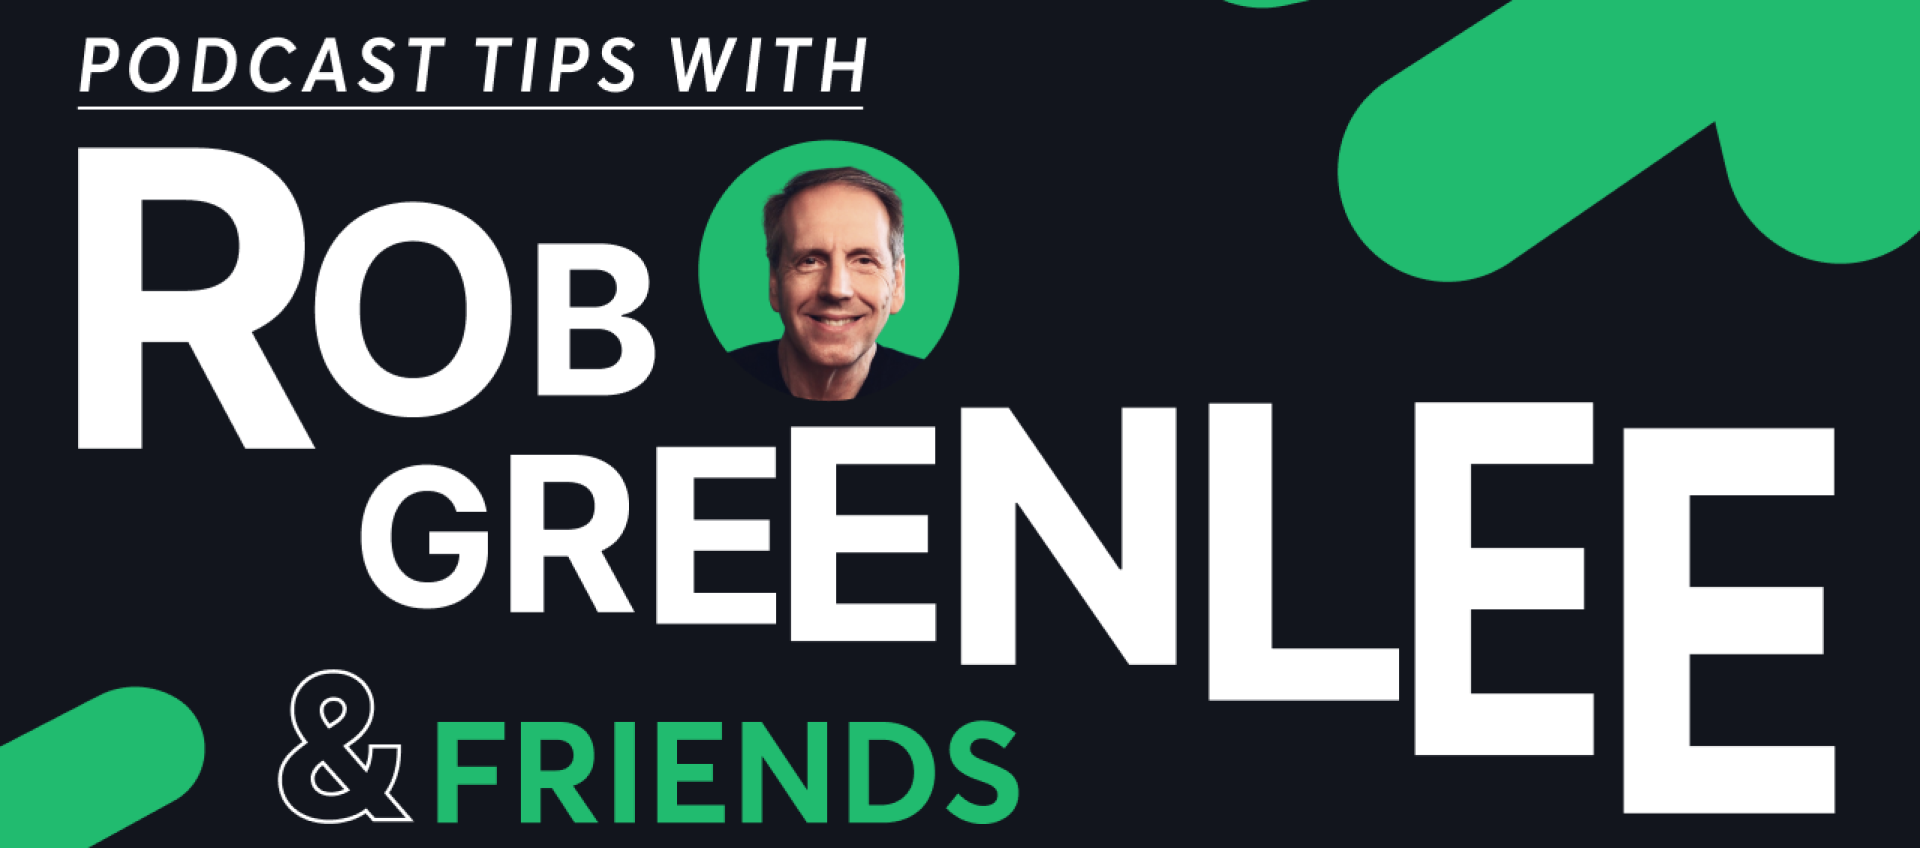 Podcast Tips with Rob Greenlee